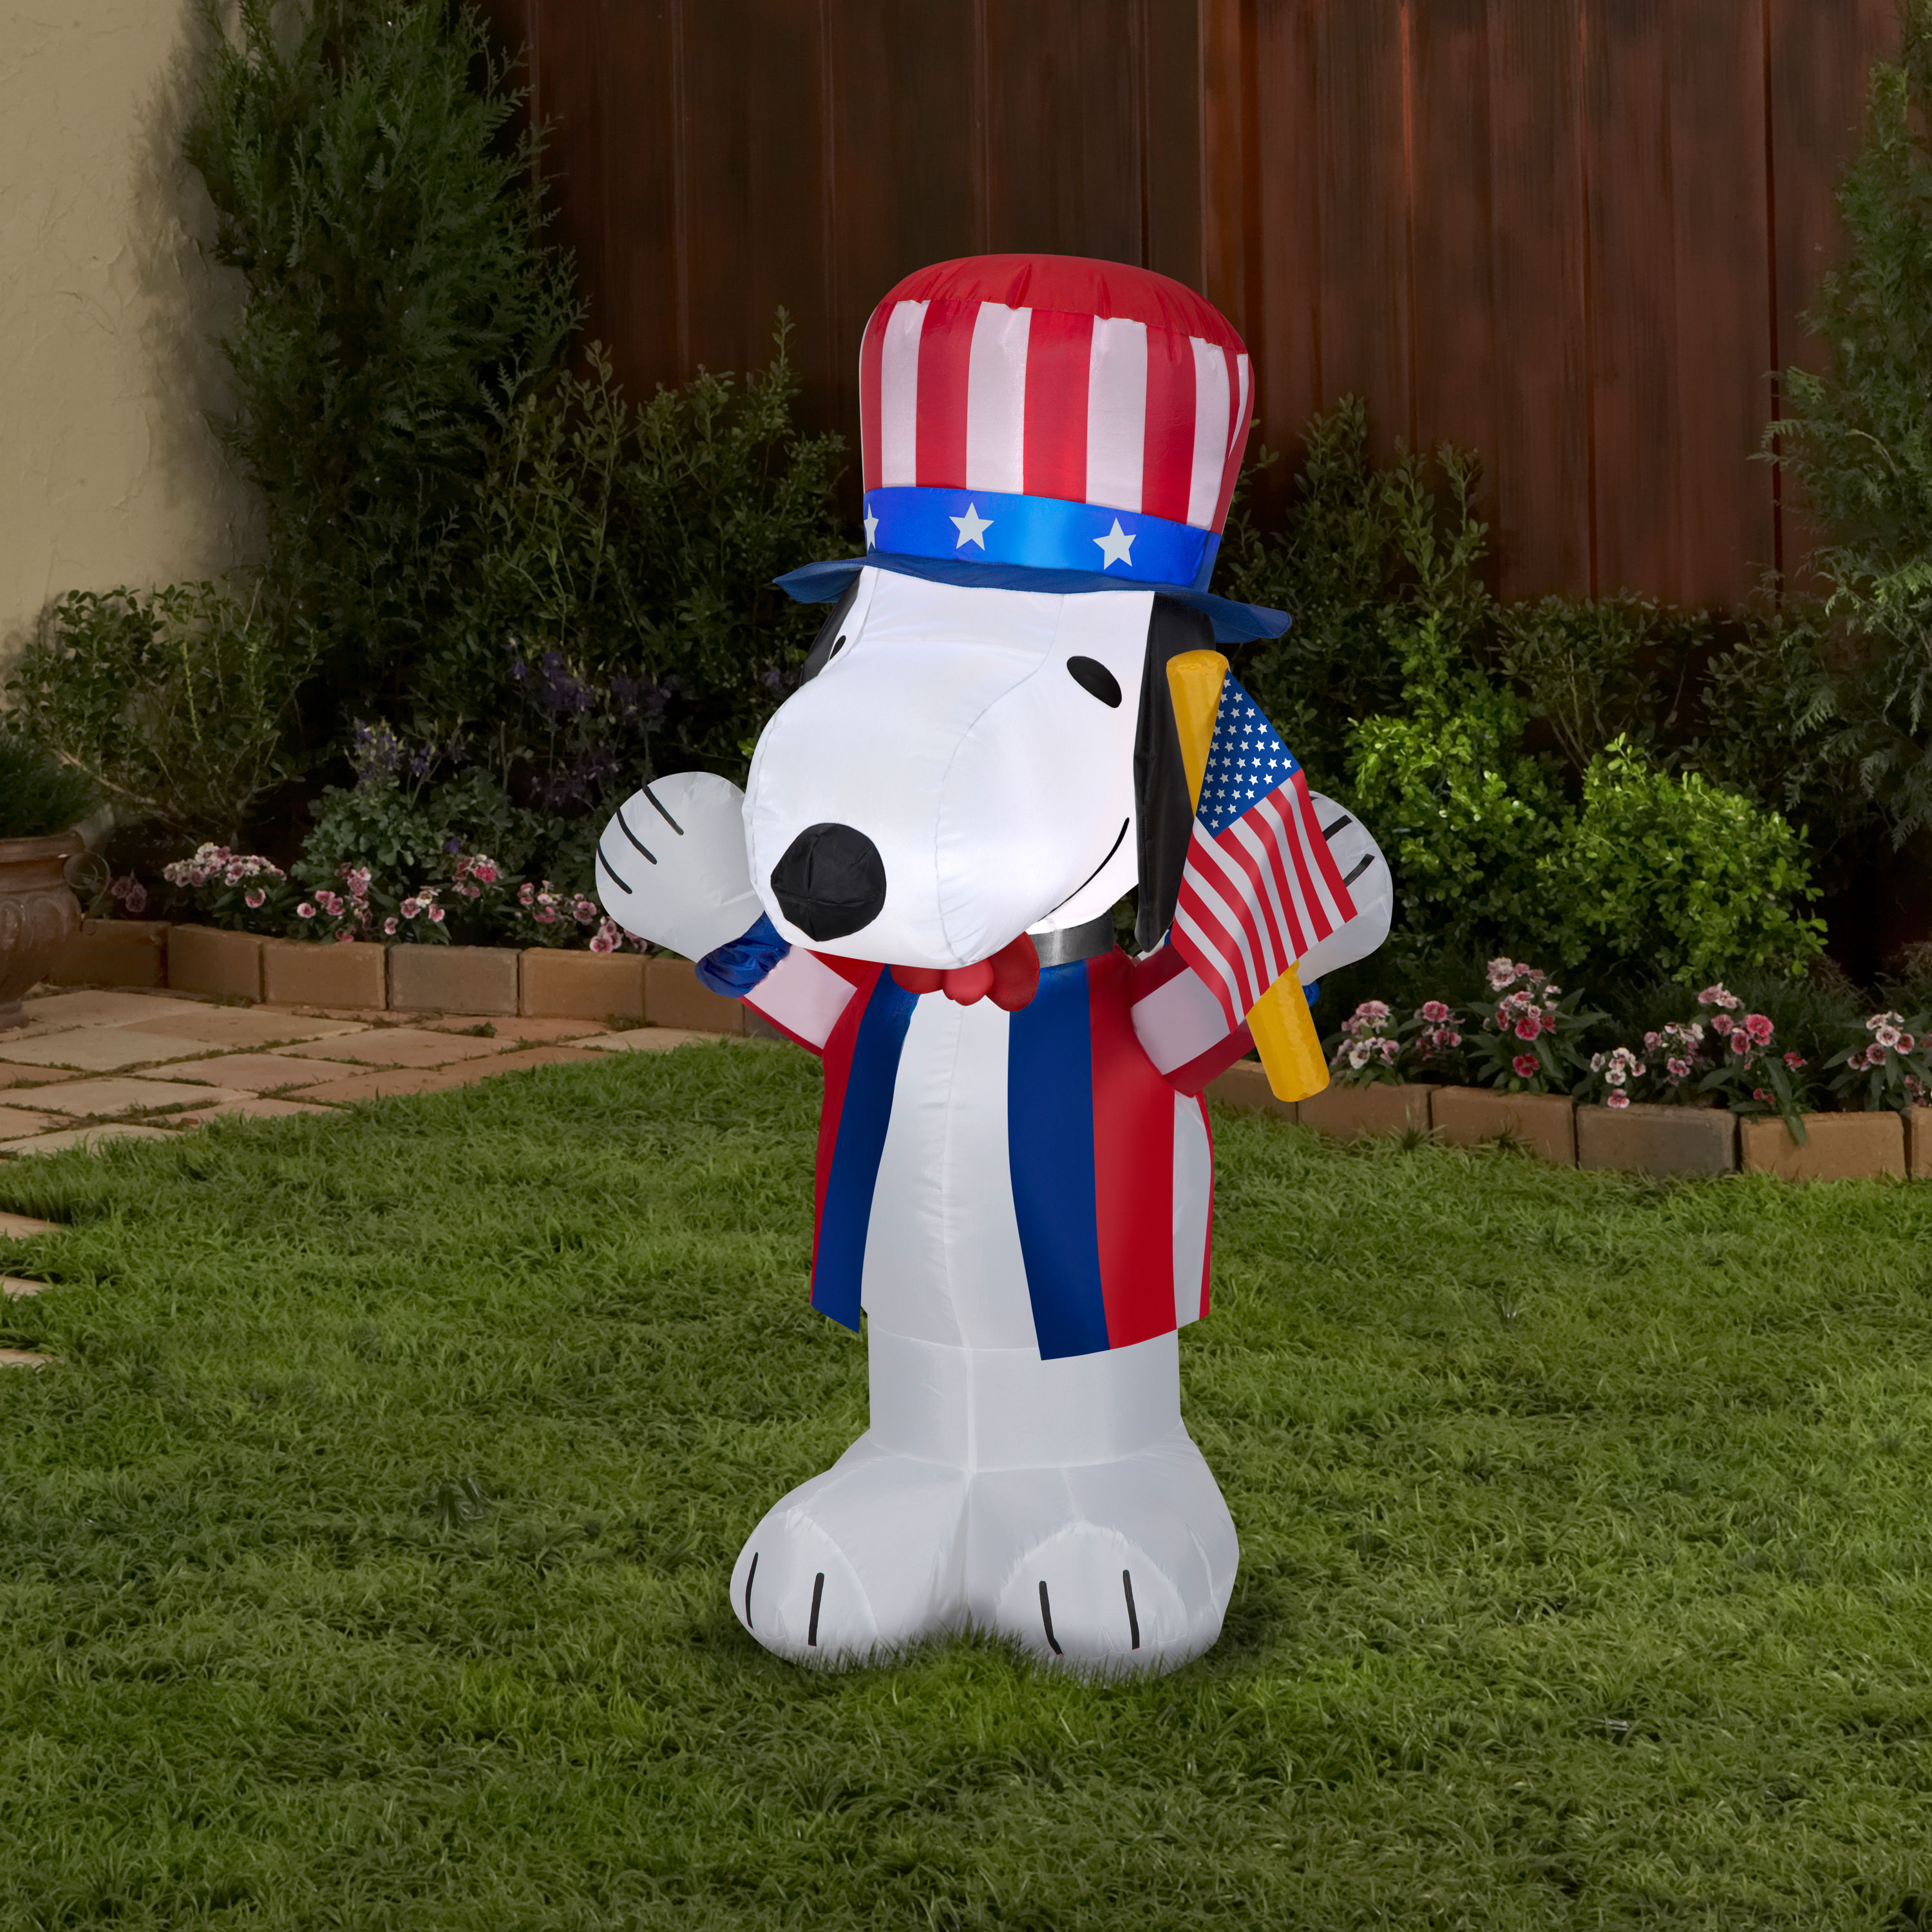 4-foot Tall Gemmy Airblown Inflatable Patriotic Uncle Sam with Top Hat July 4th Life Sized Decoration